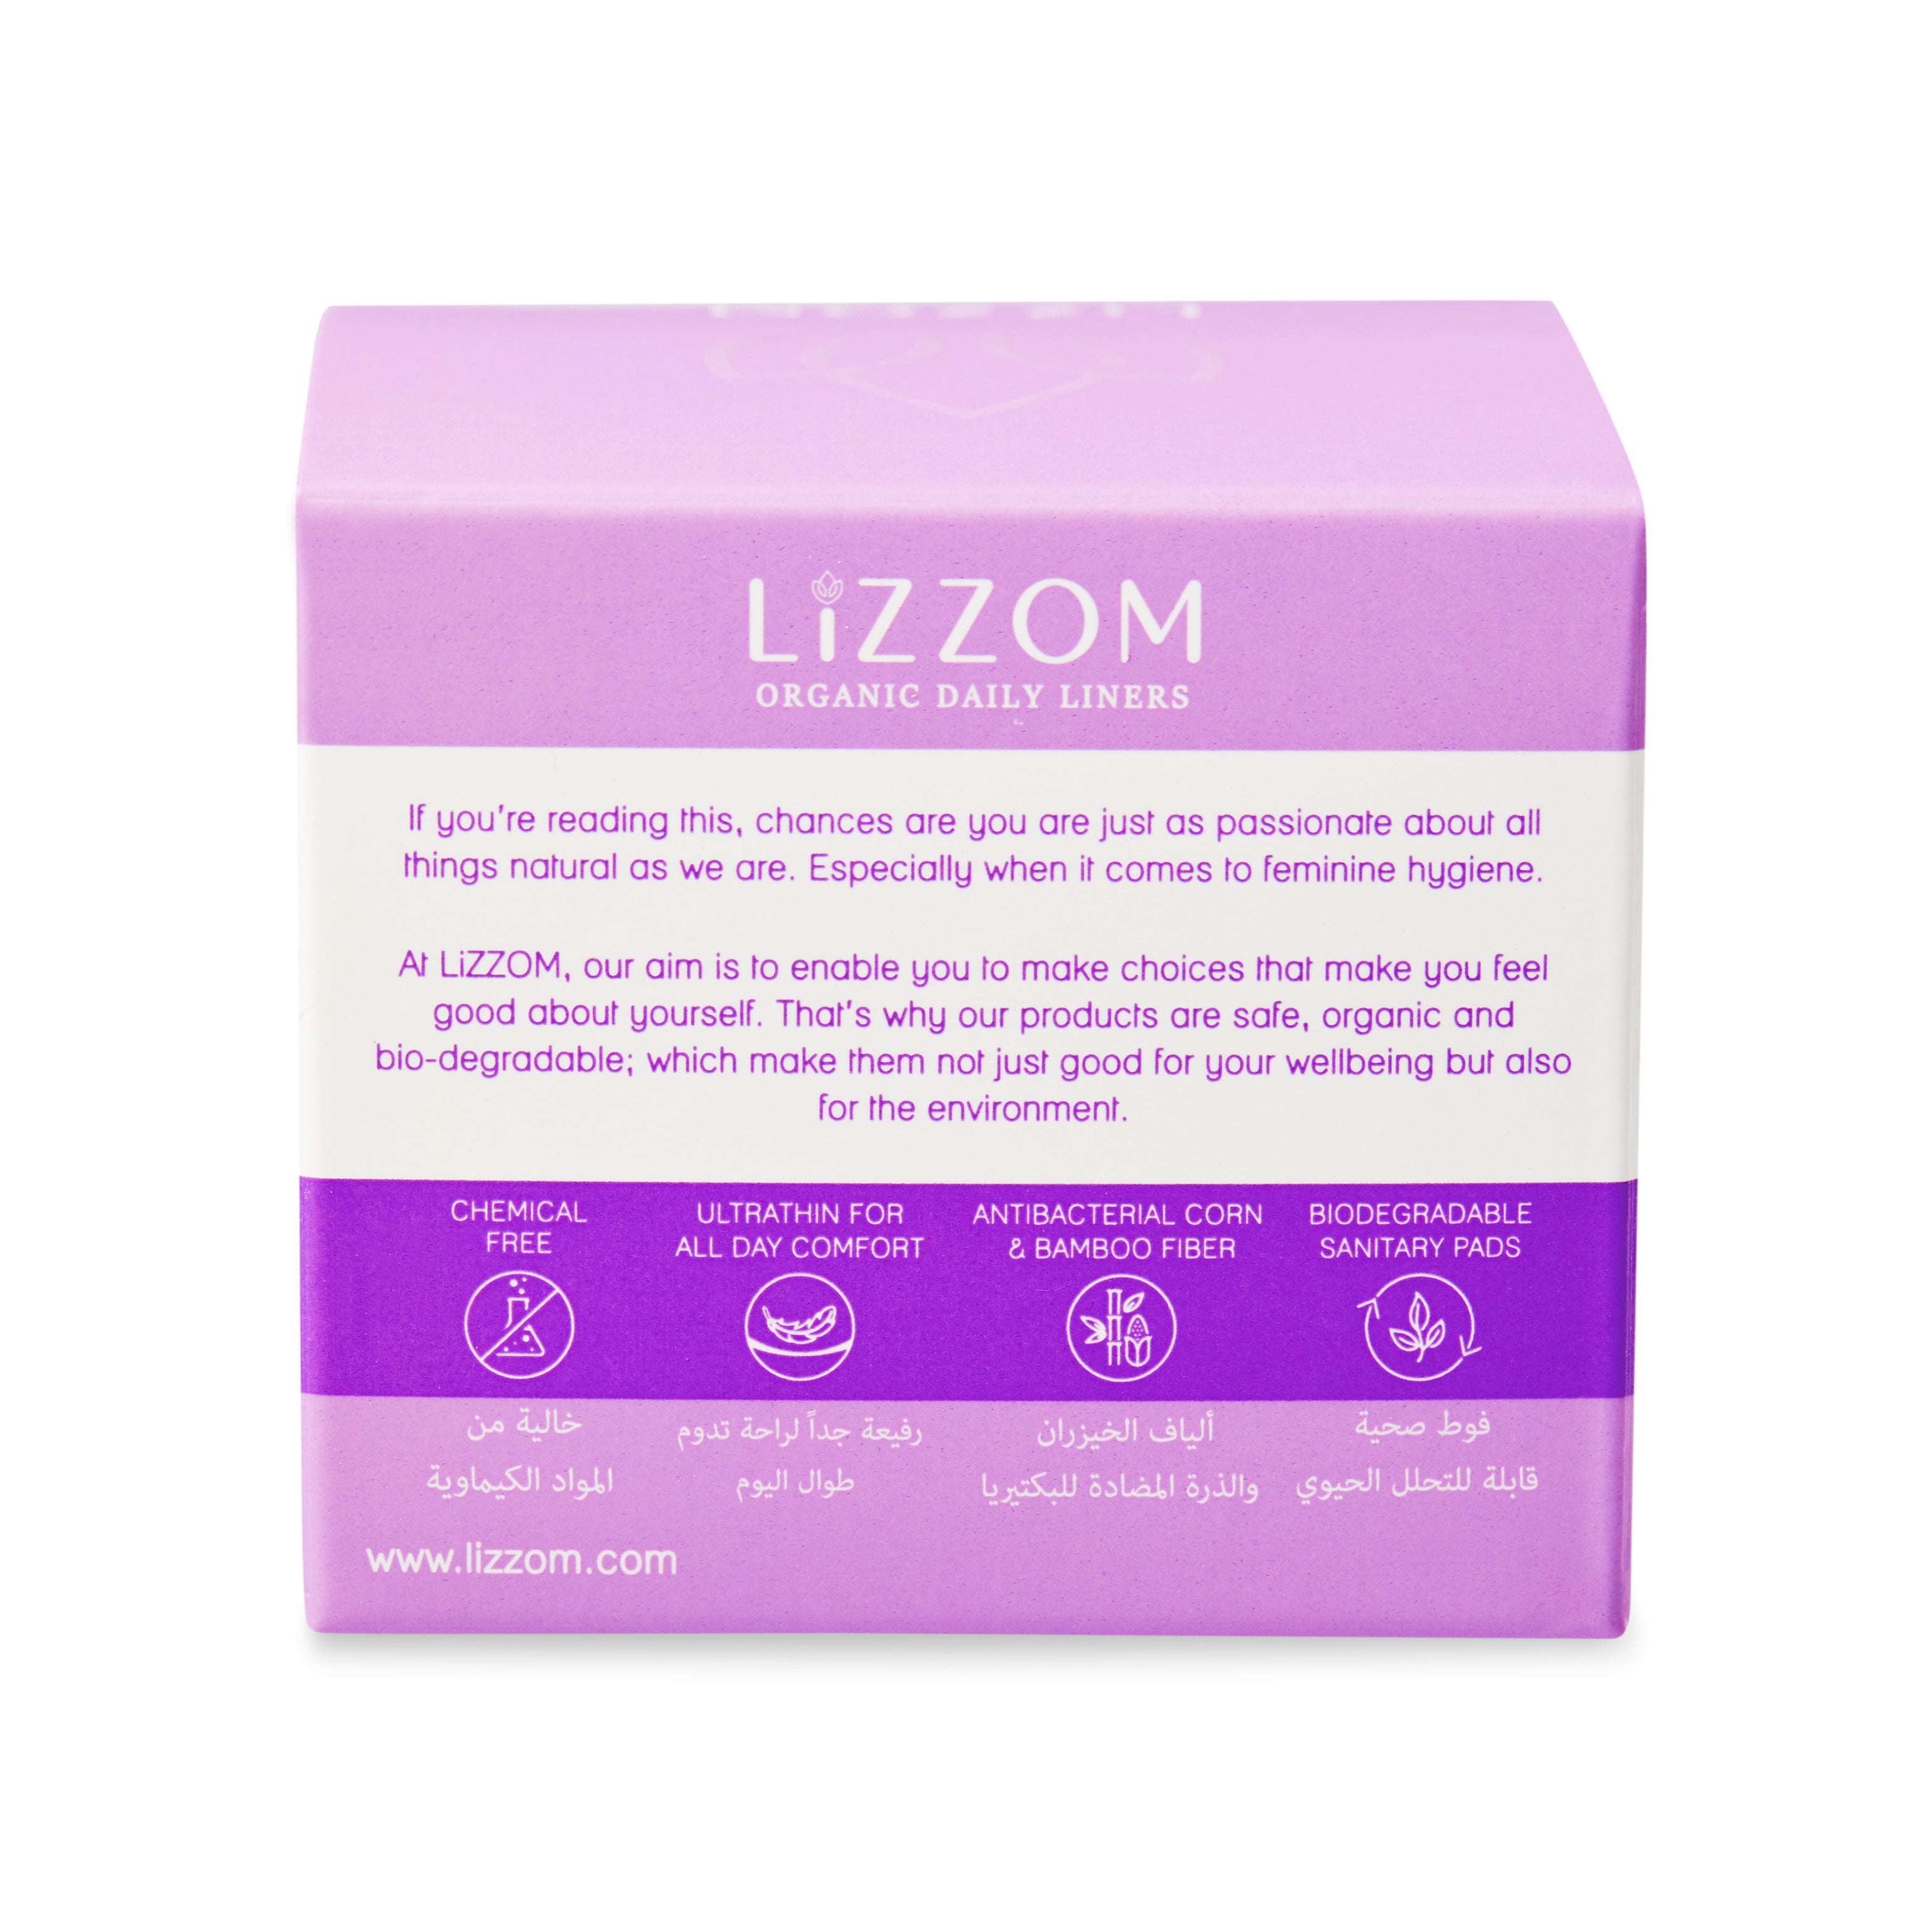 LiZZOM Organic Daily liners - Pack of 3 (60 Liners)